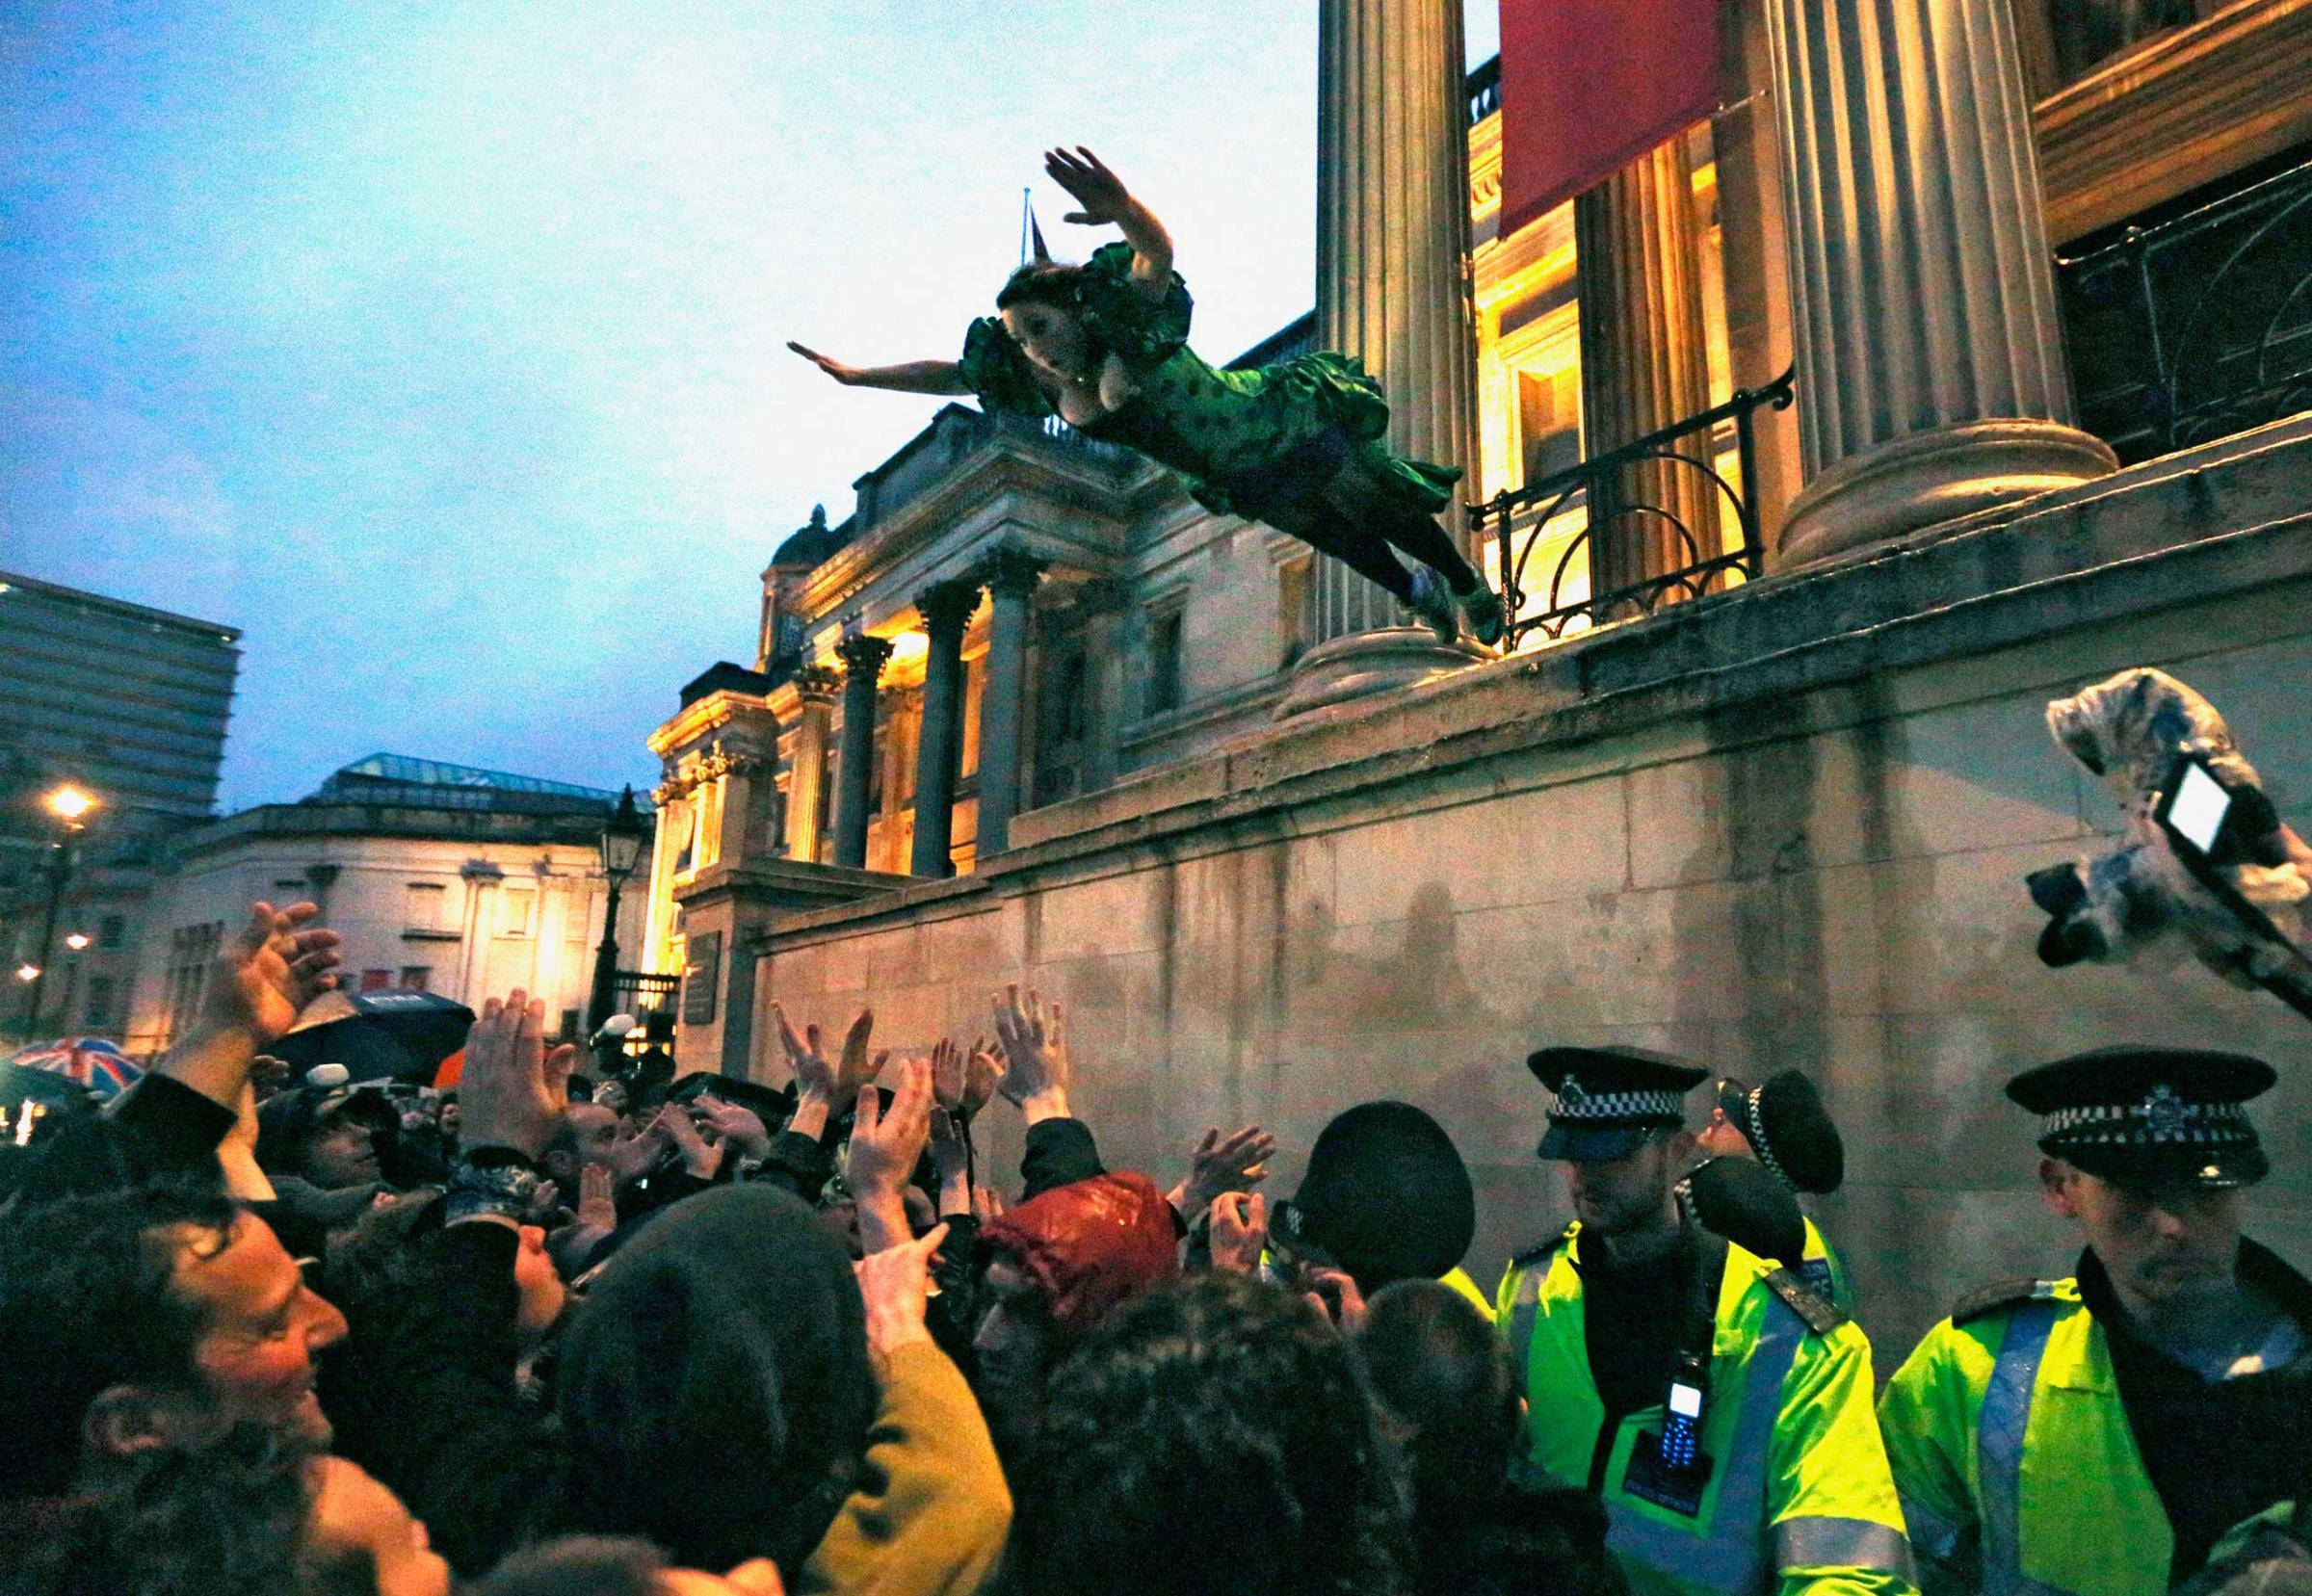 A reveller leaps into the crowd during an outdoor party celebrating the death of former British PM Thatcher in London